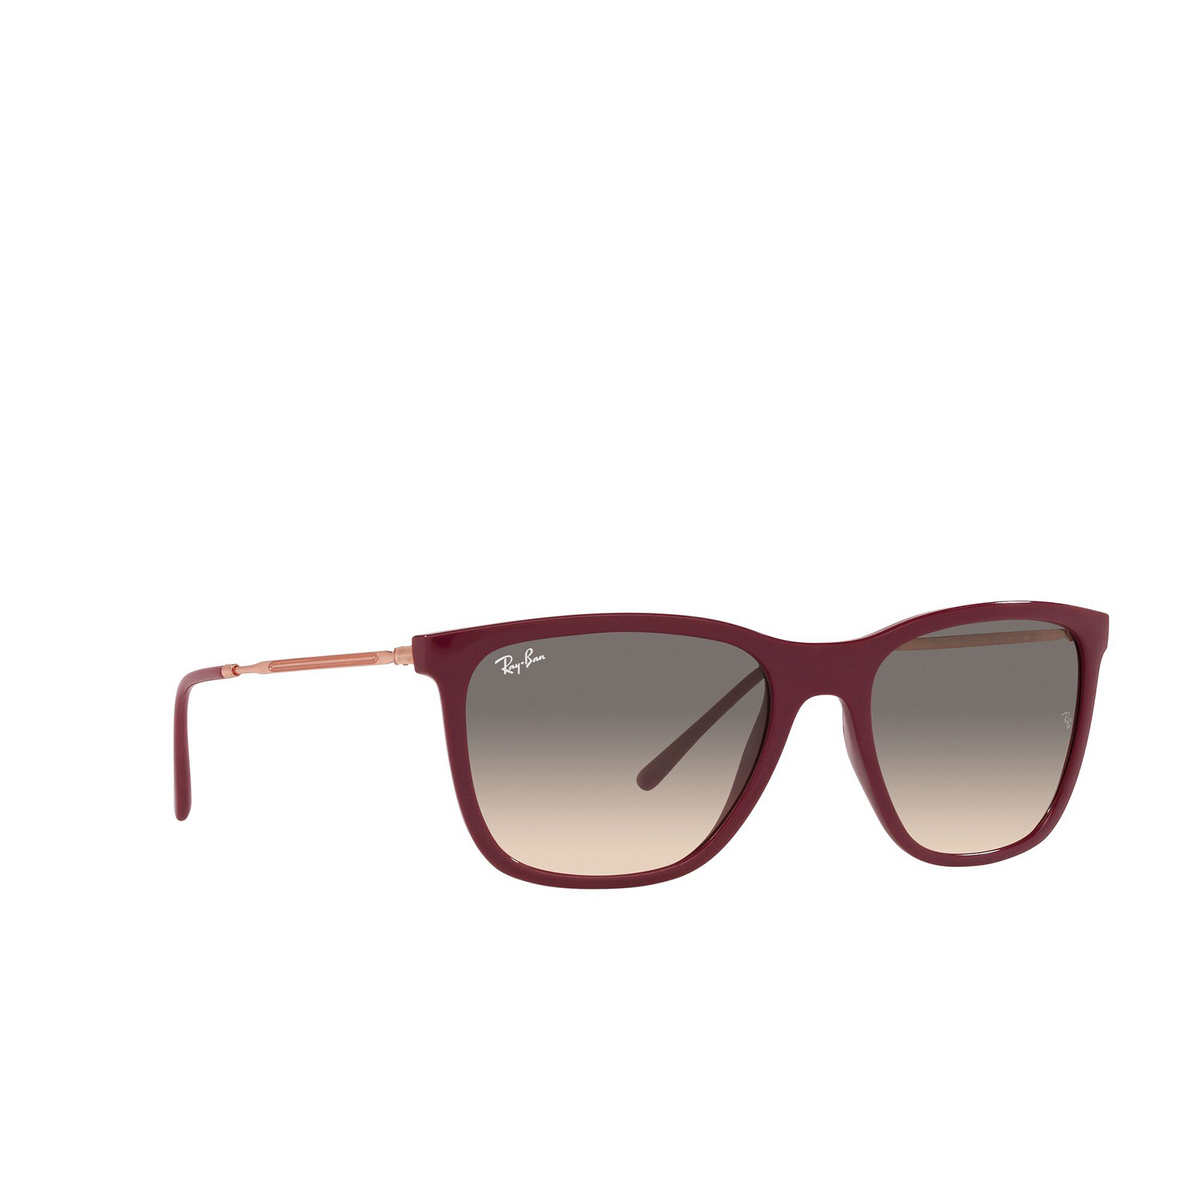 Ray-Ban RB4344 Sunglasses 653432 Red Cherry - three-quarters view